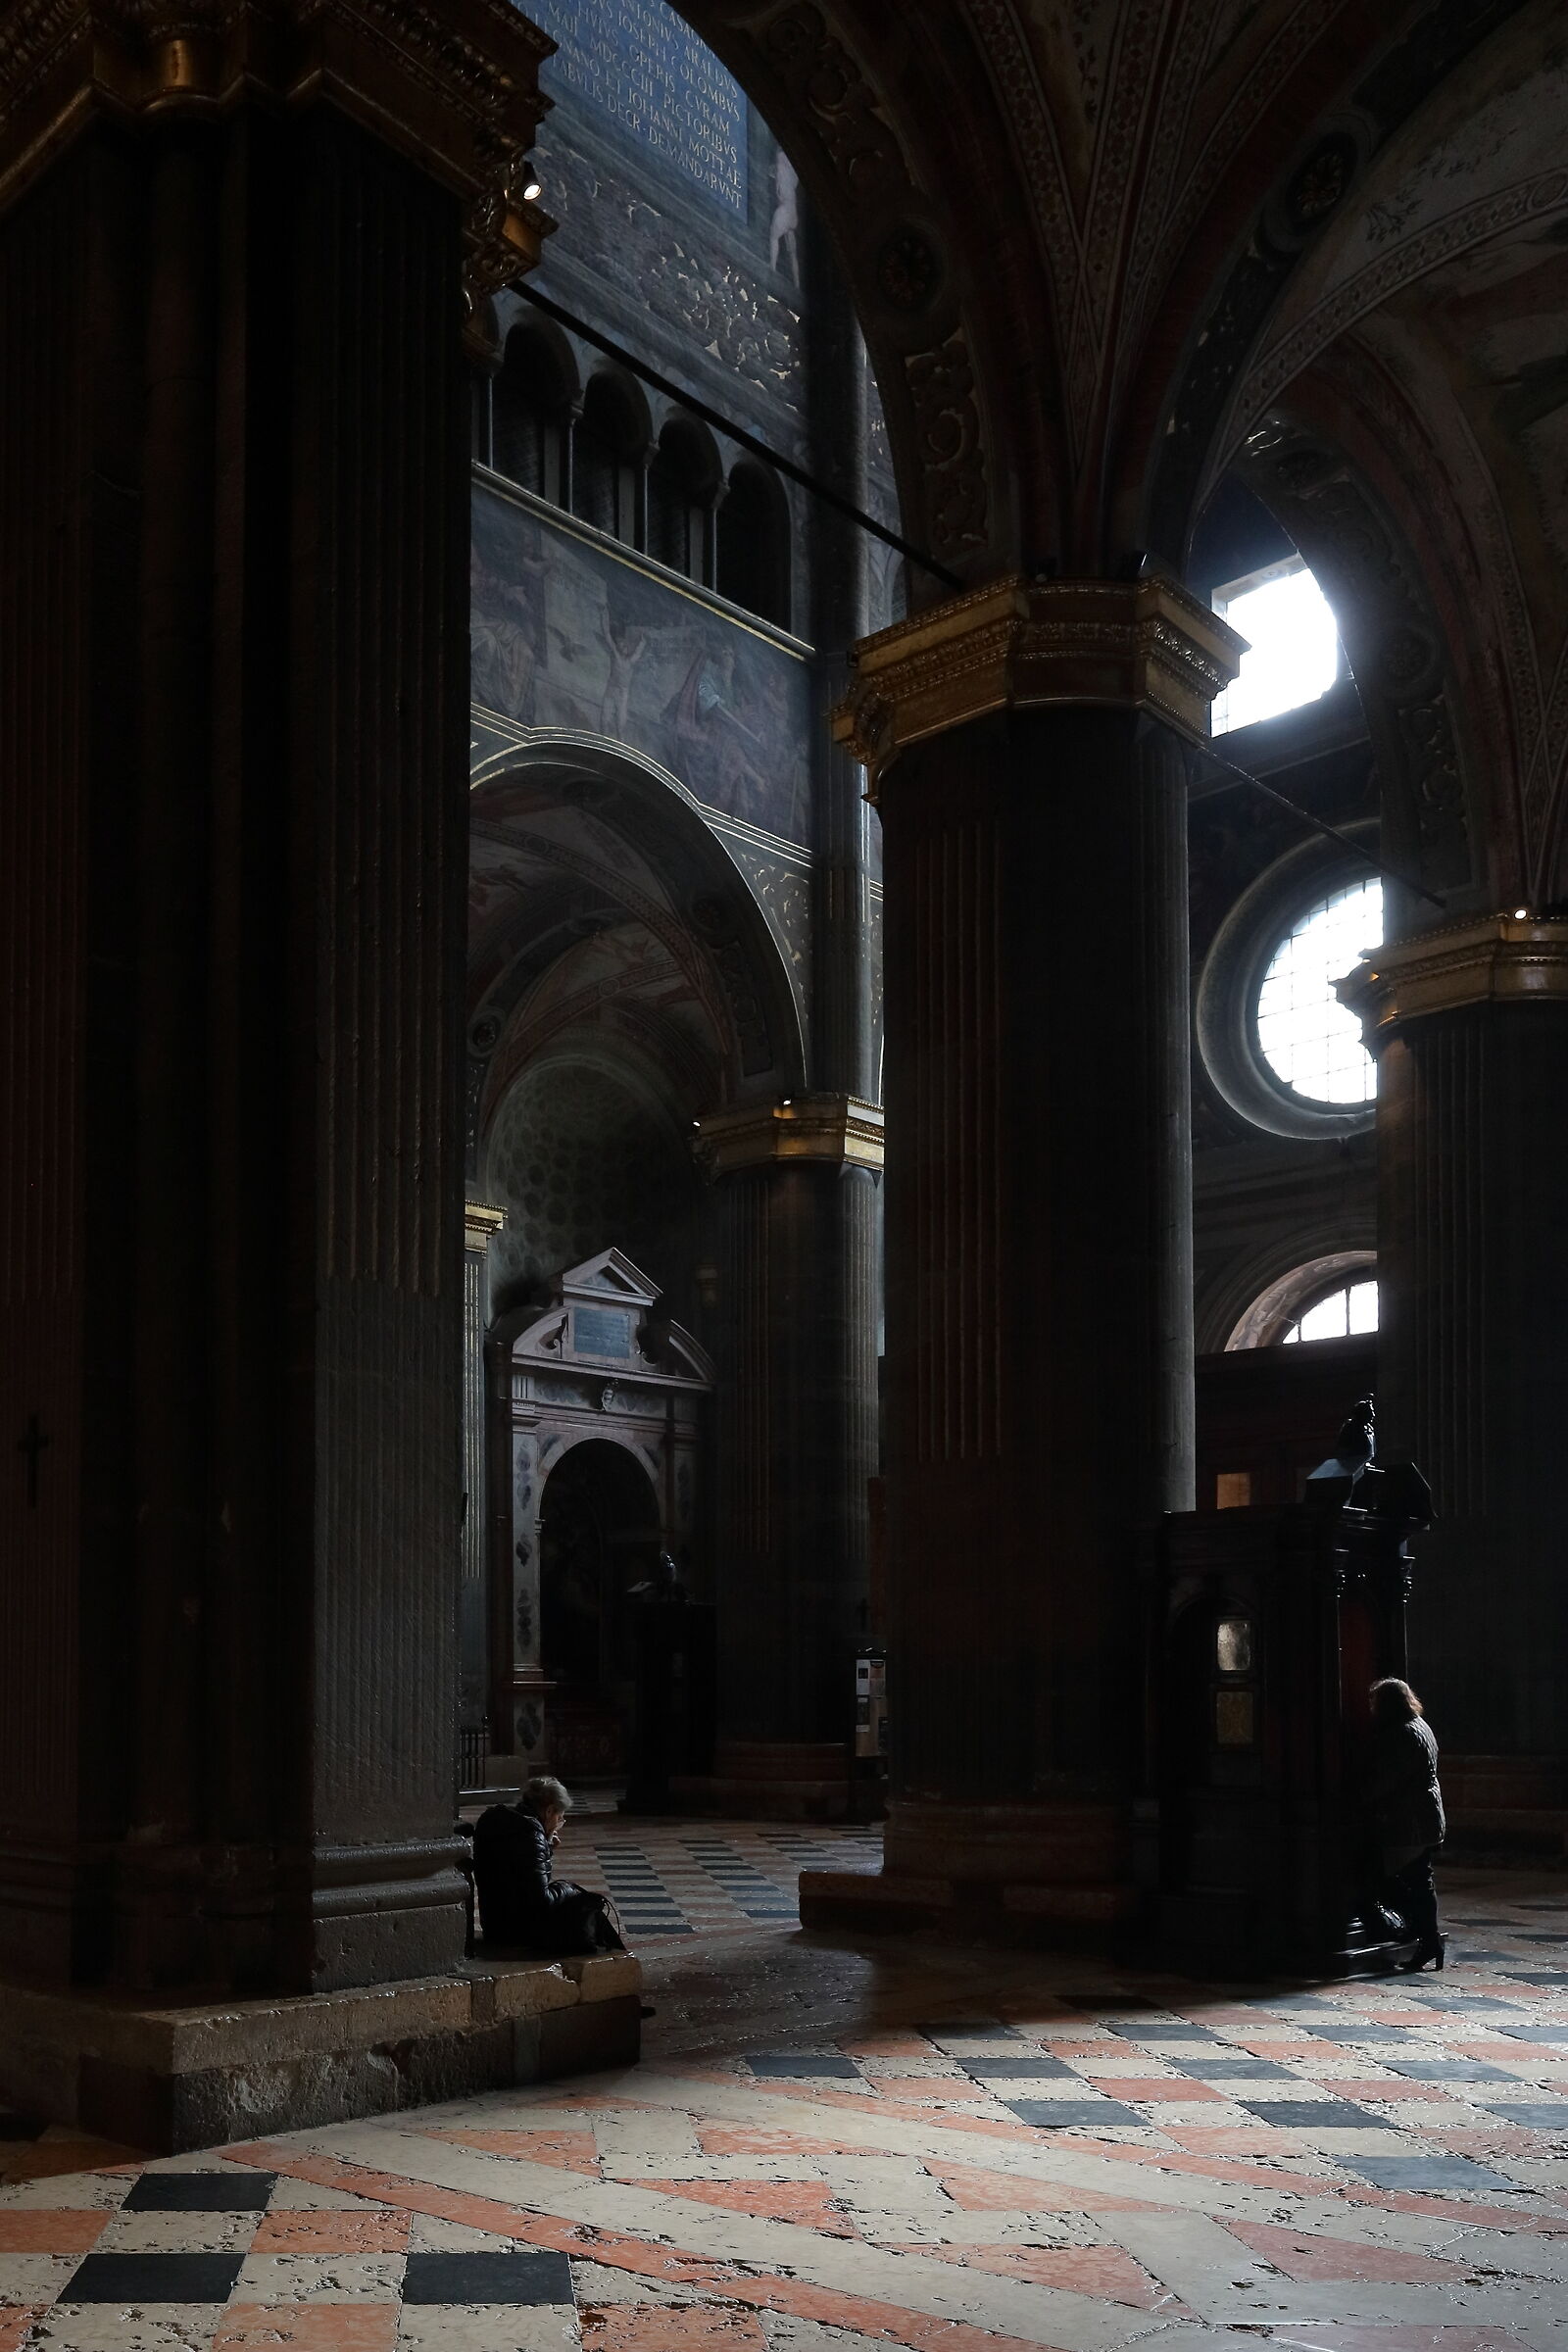 Cremona, confessions in the cathedral...